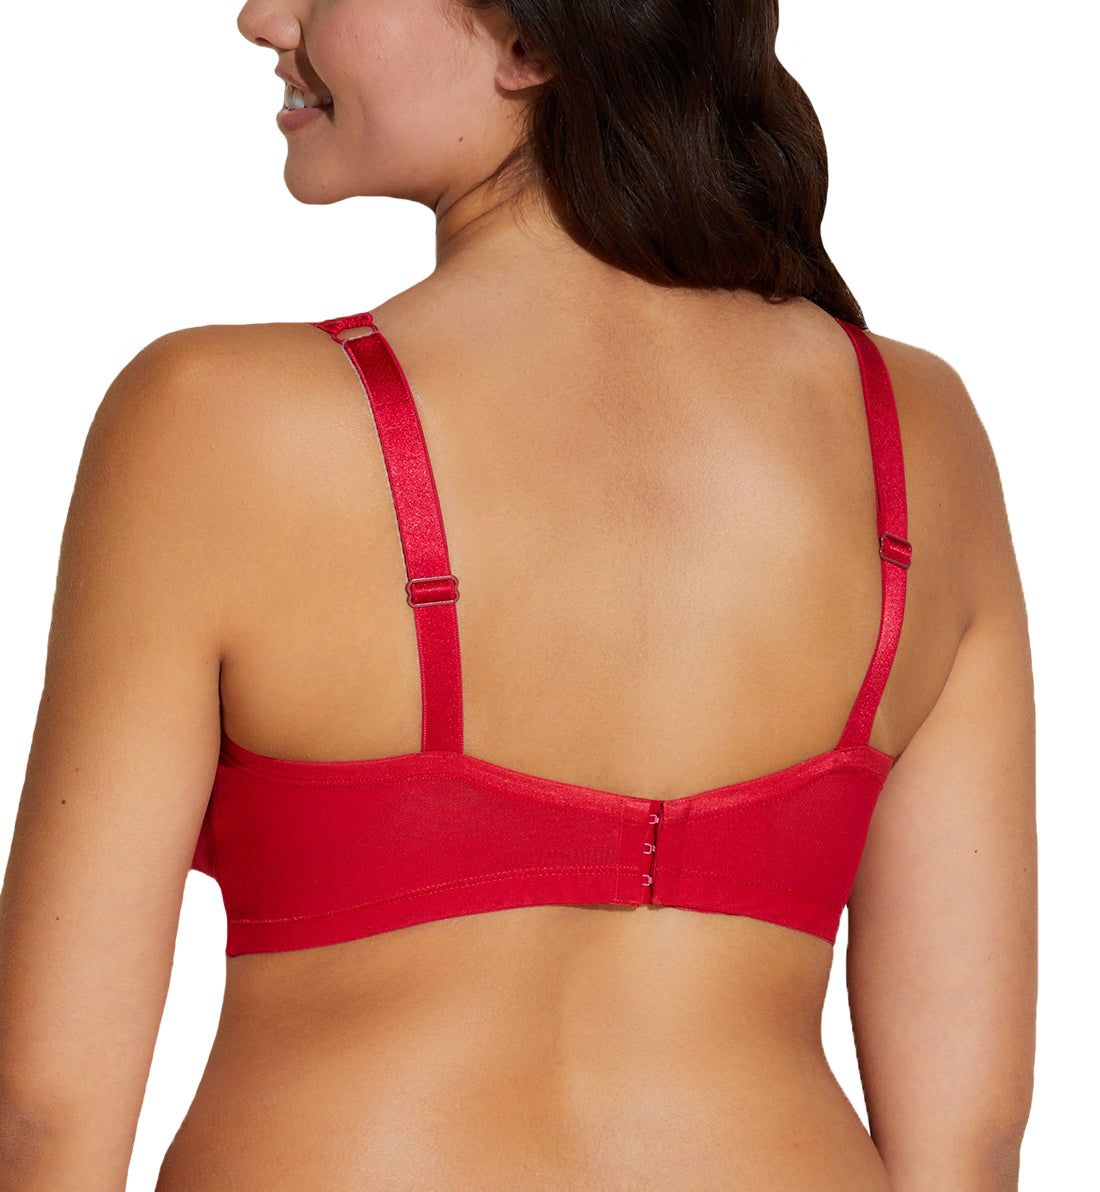 Cosabella Soire Confidence CURVY Bralette (SOIRC1310),XS,Mystic Red - Mystic Red,XS